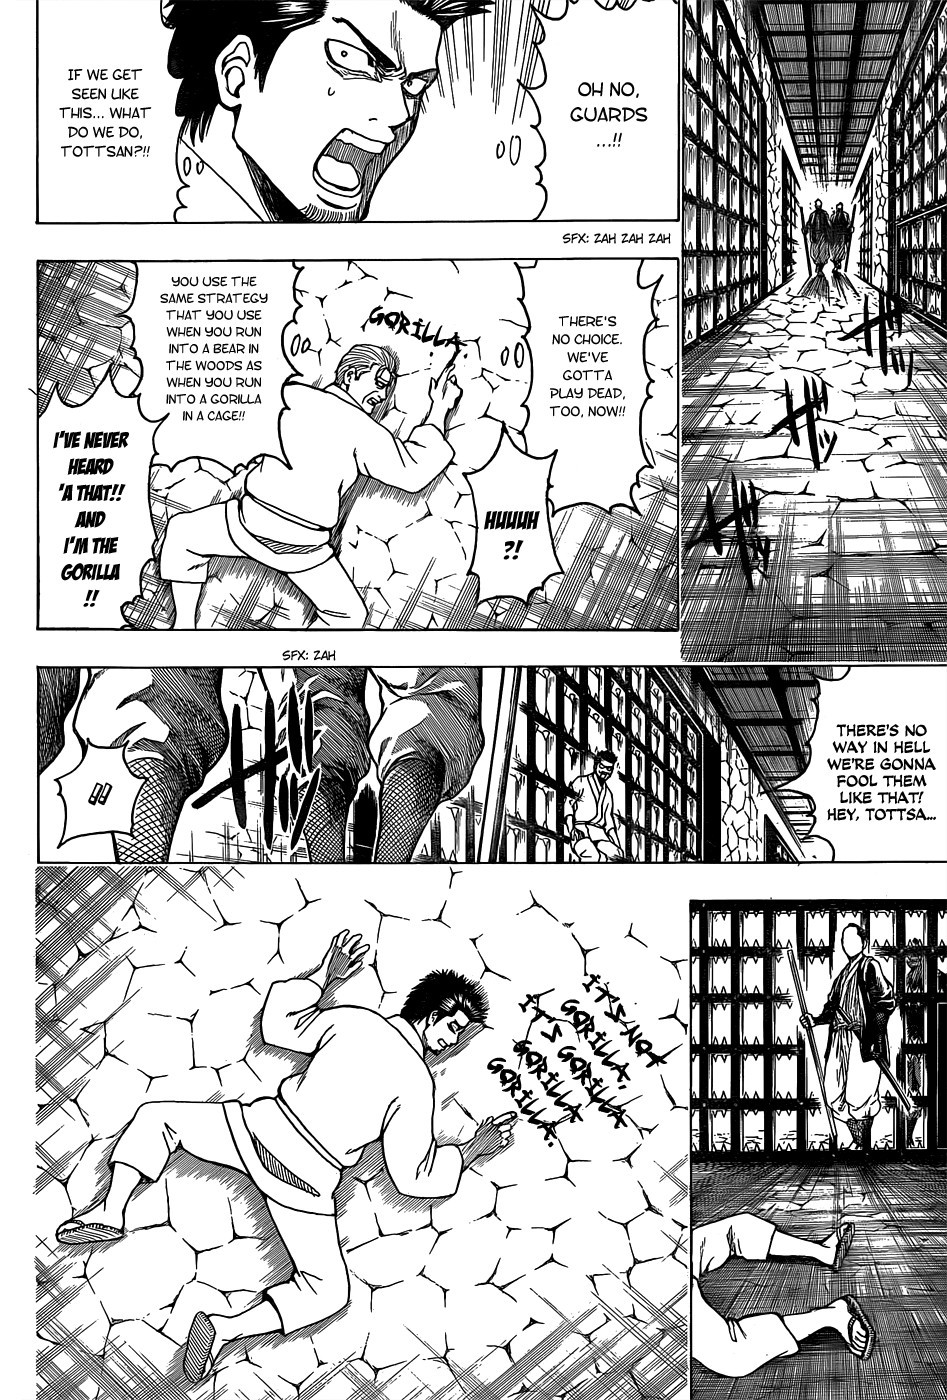 Gintama chapter 530 page 11